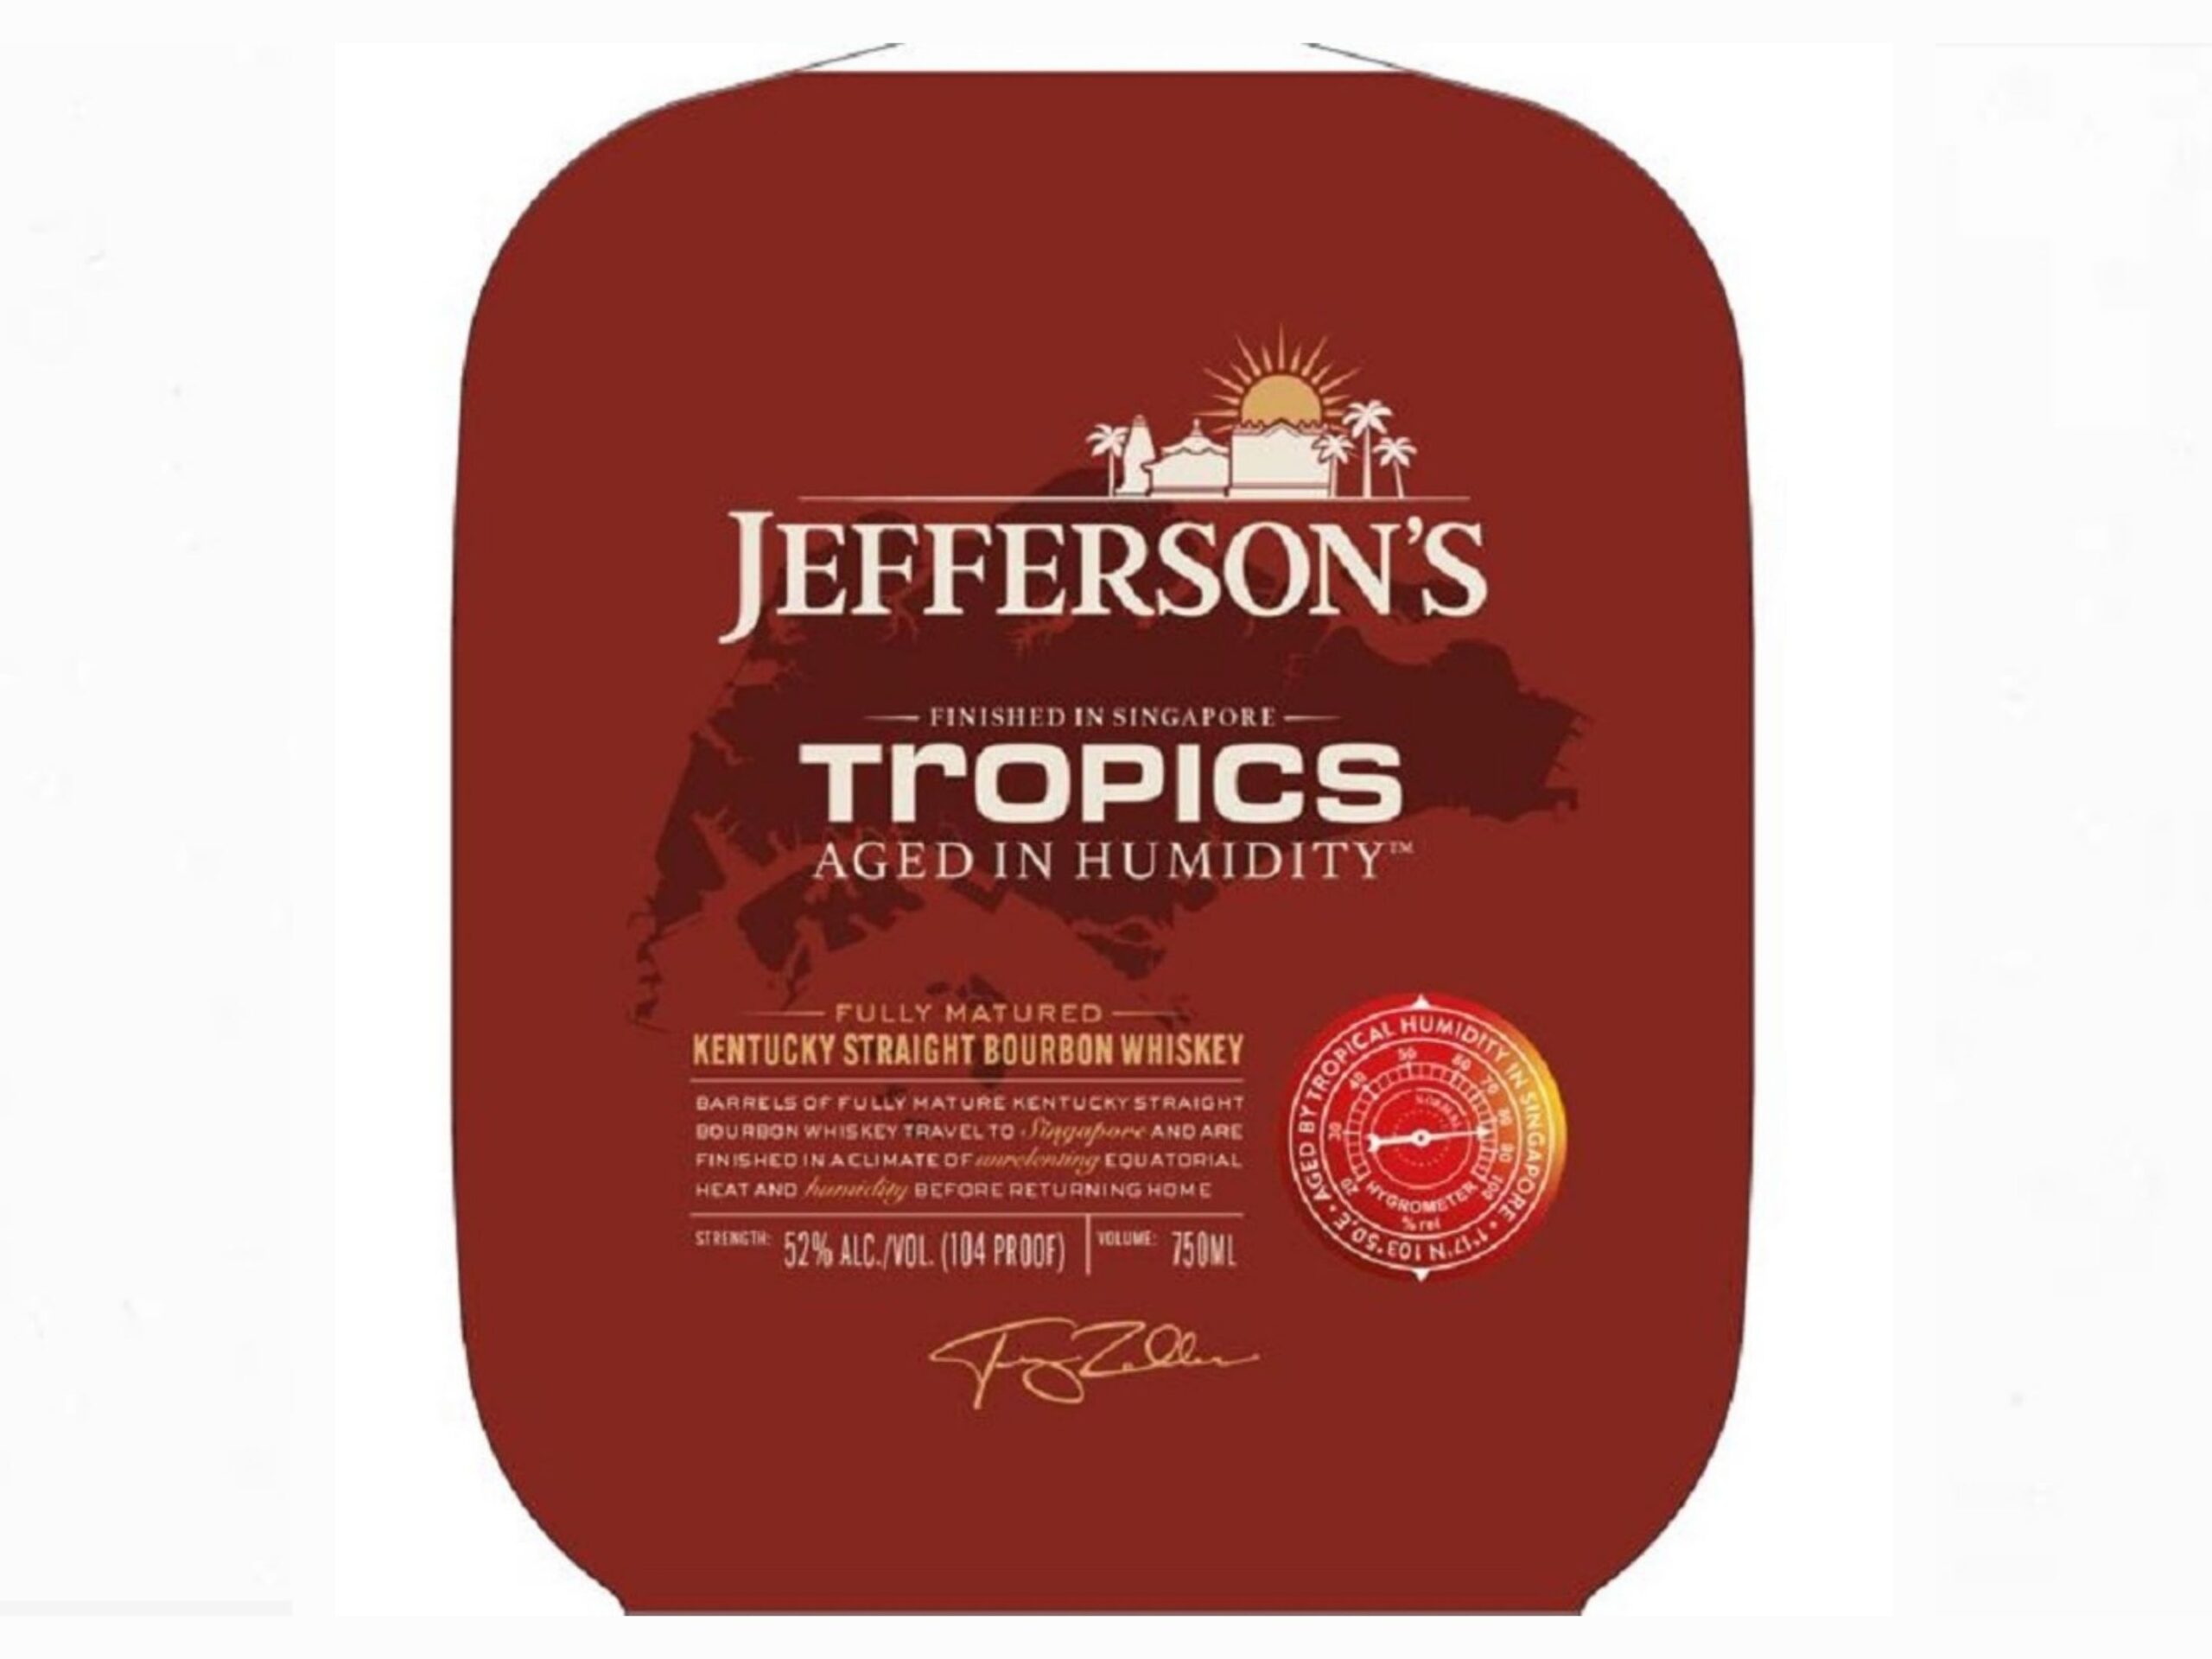 Jefferson’s Tropics – A Preview of a Review